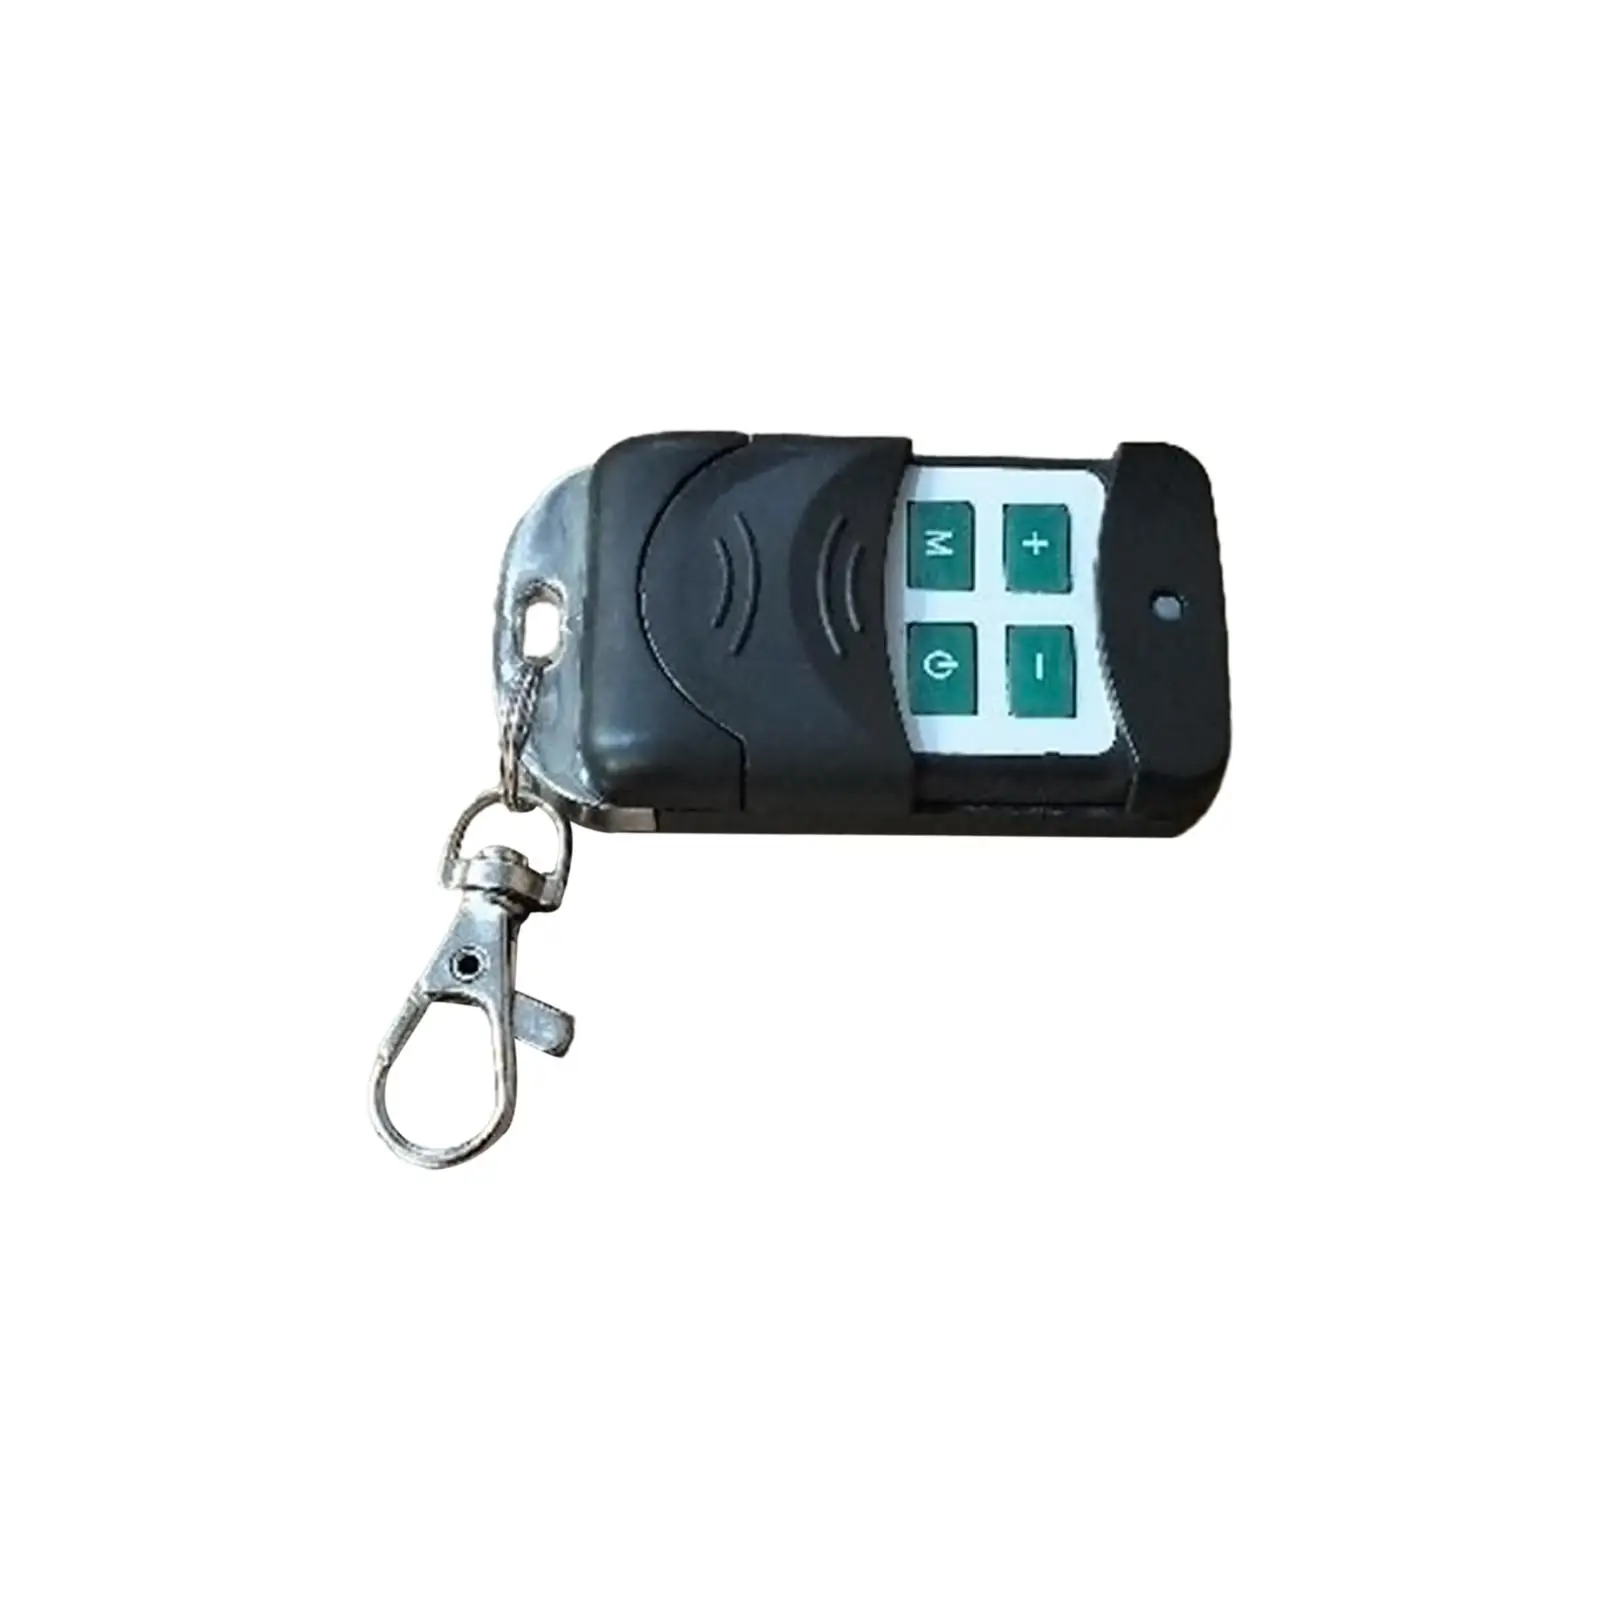 Car Parking Heater Remote Control Durable for Automotive Trucks Vehicle